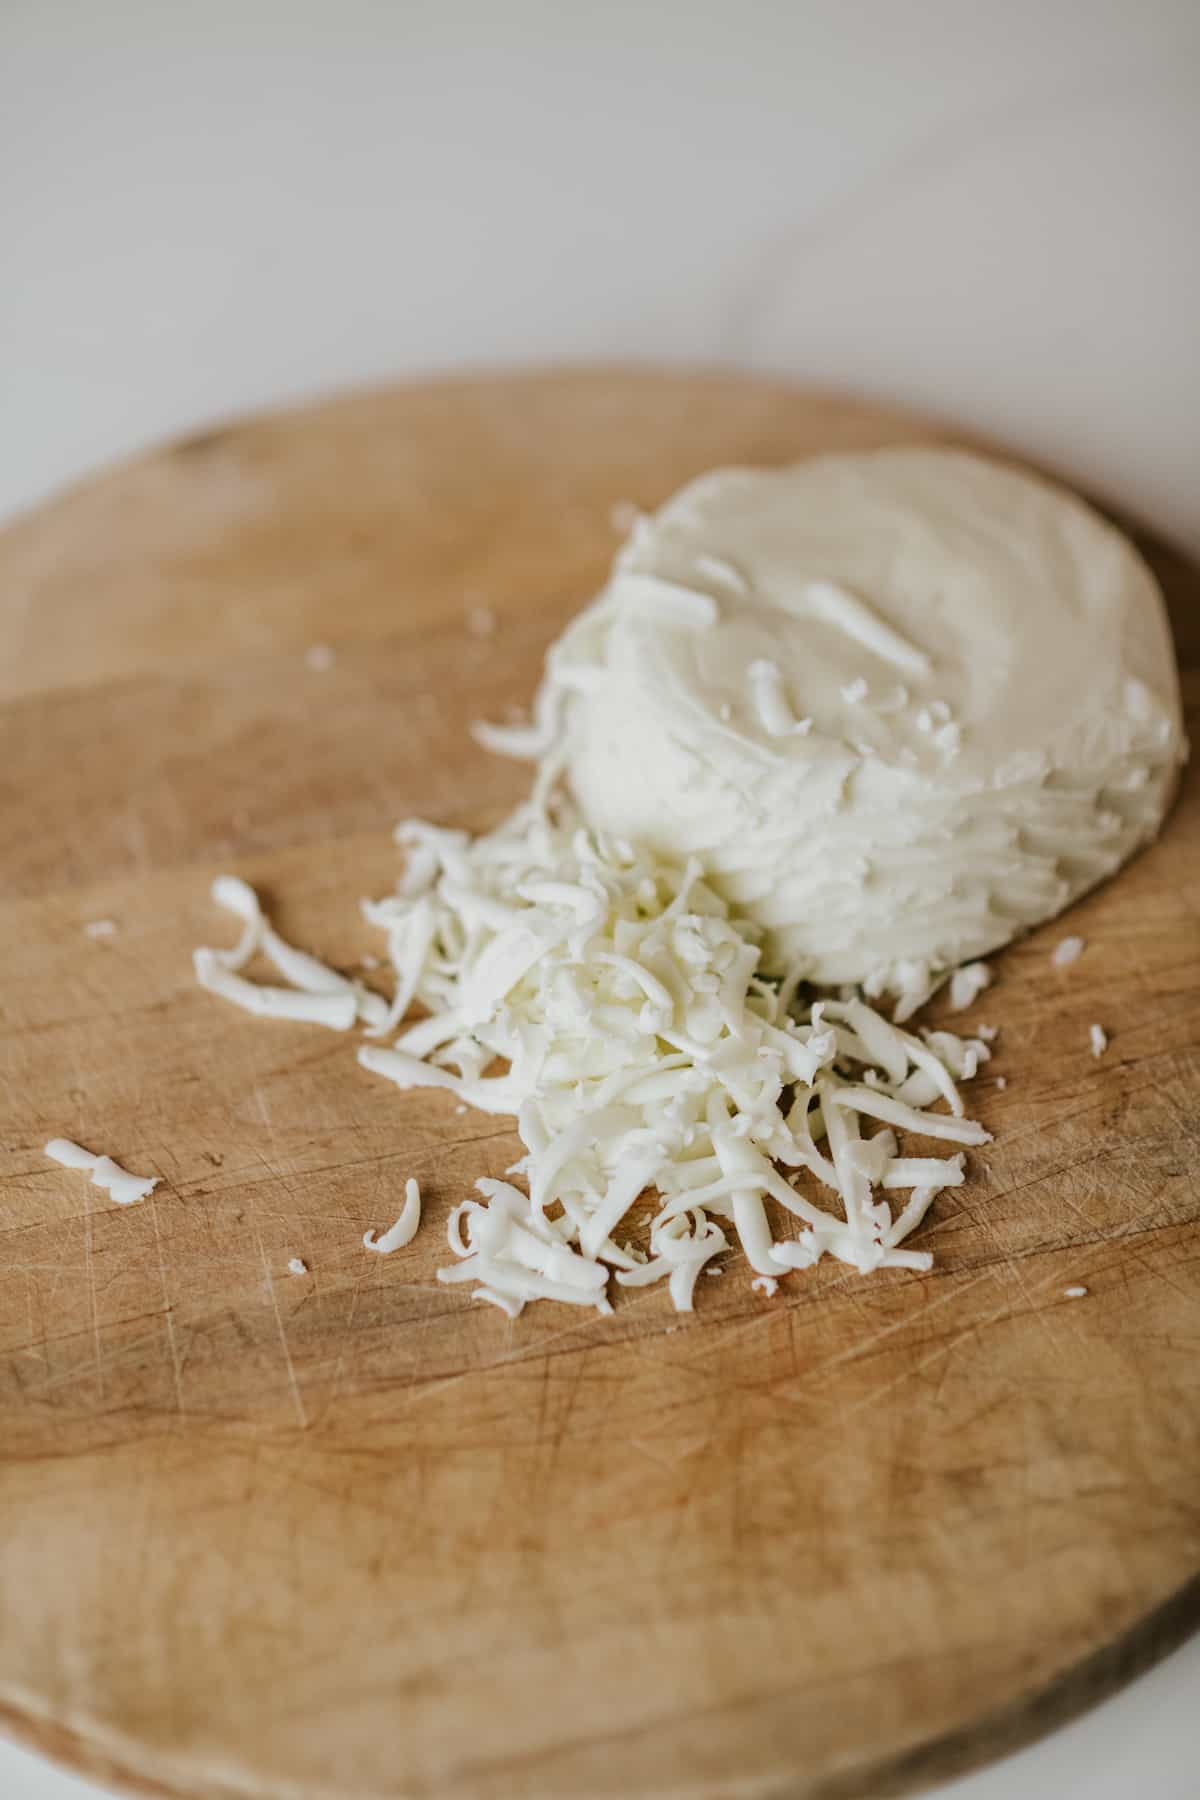 ball of quesillo cheese that has been partially grated on a wooden cutting board.